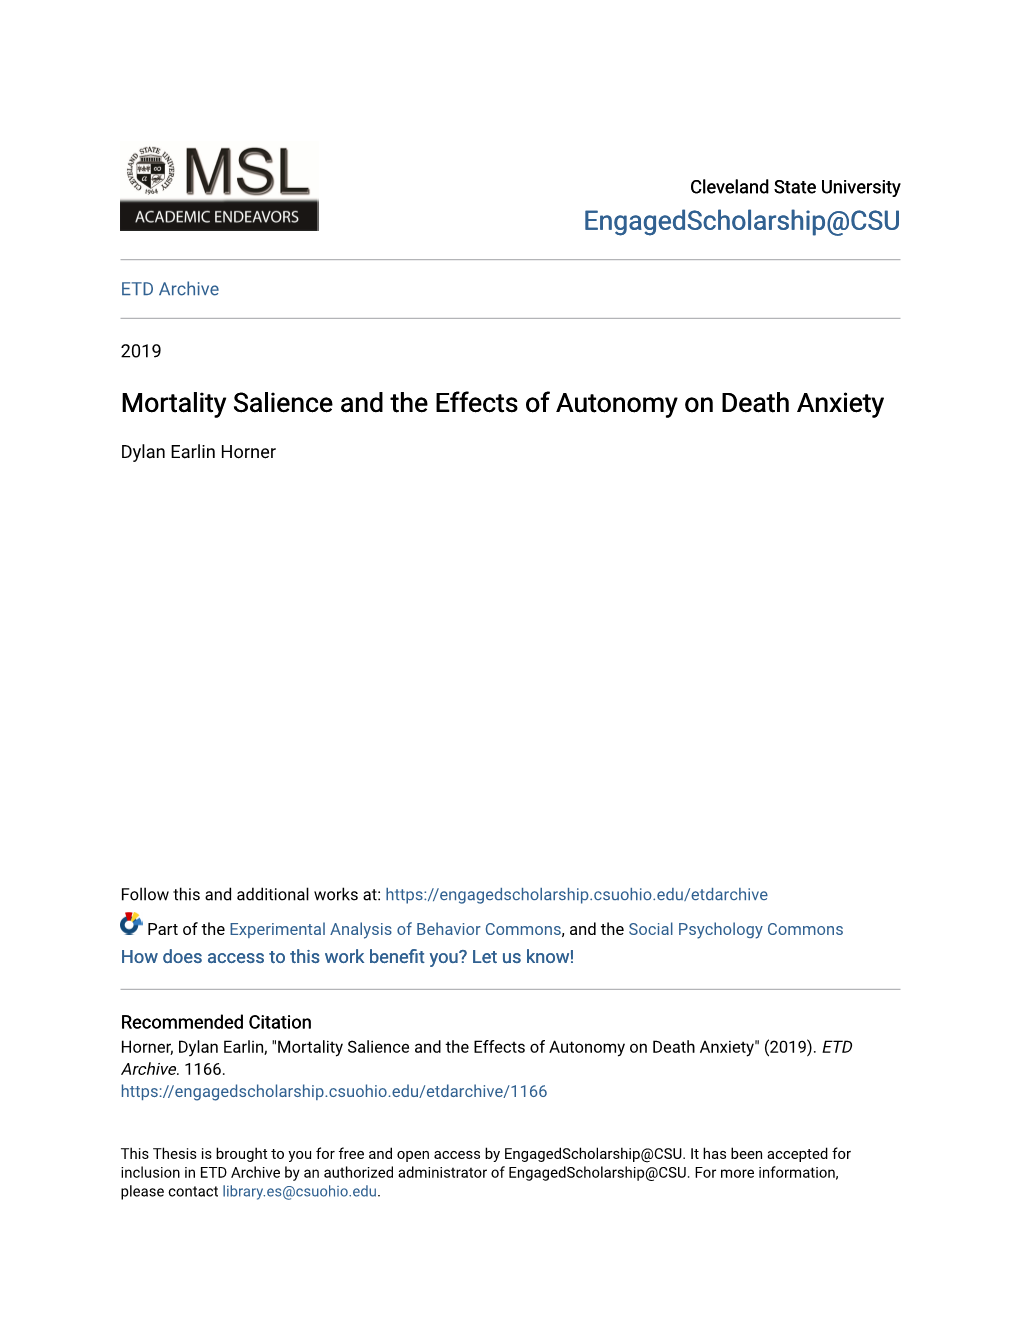 Mortality Salience and the Effects of Autonomy on Death Anxiety